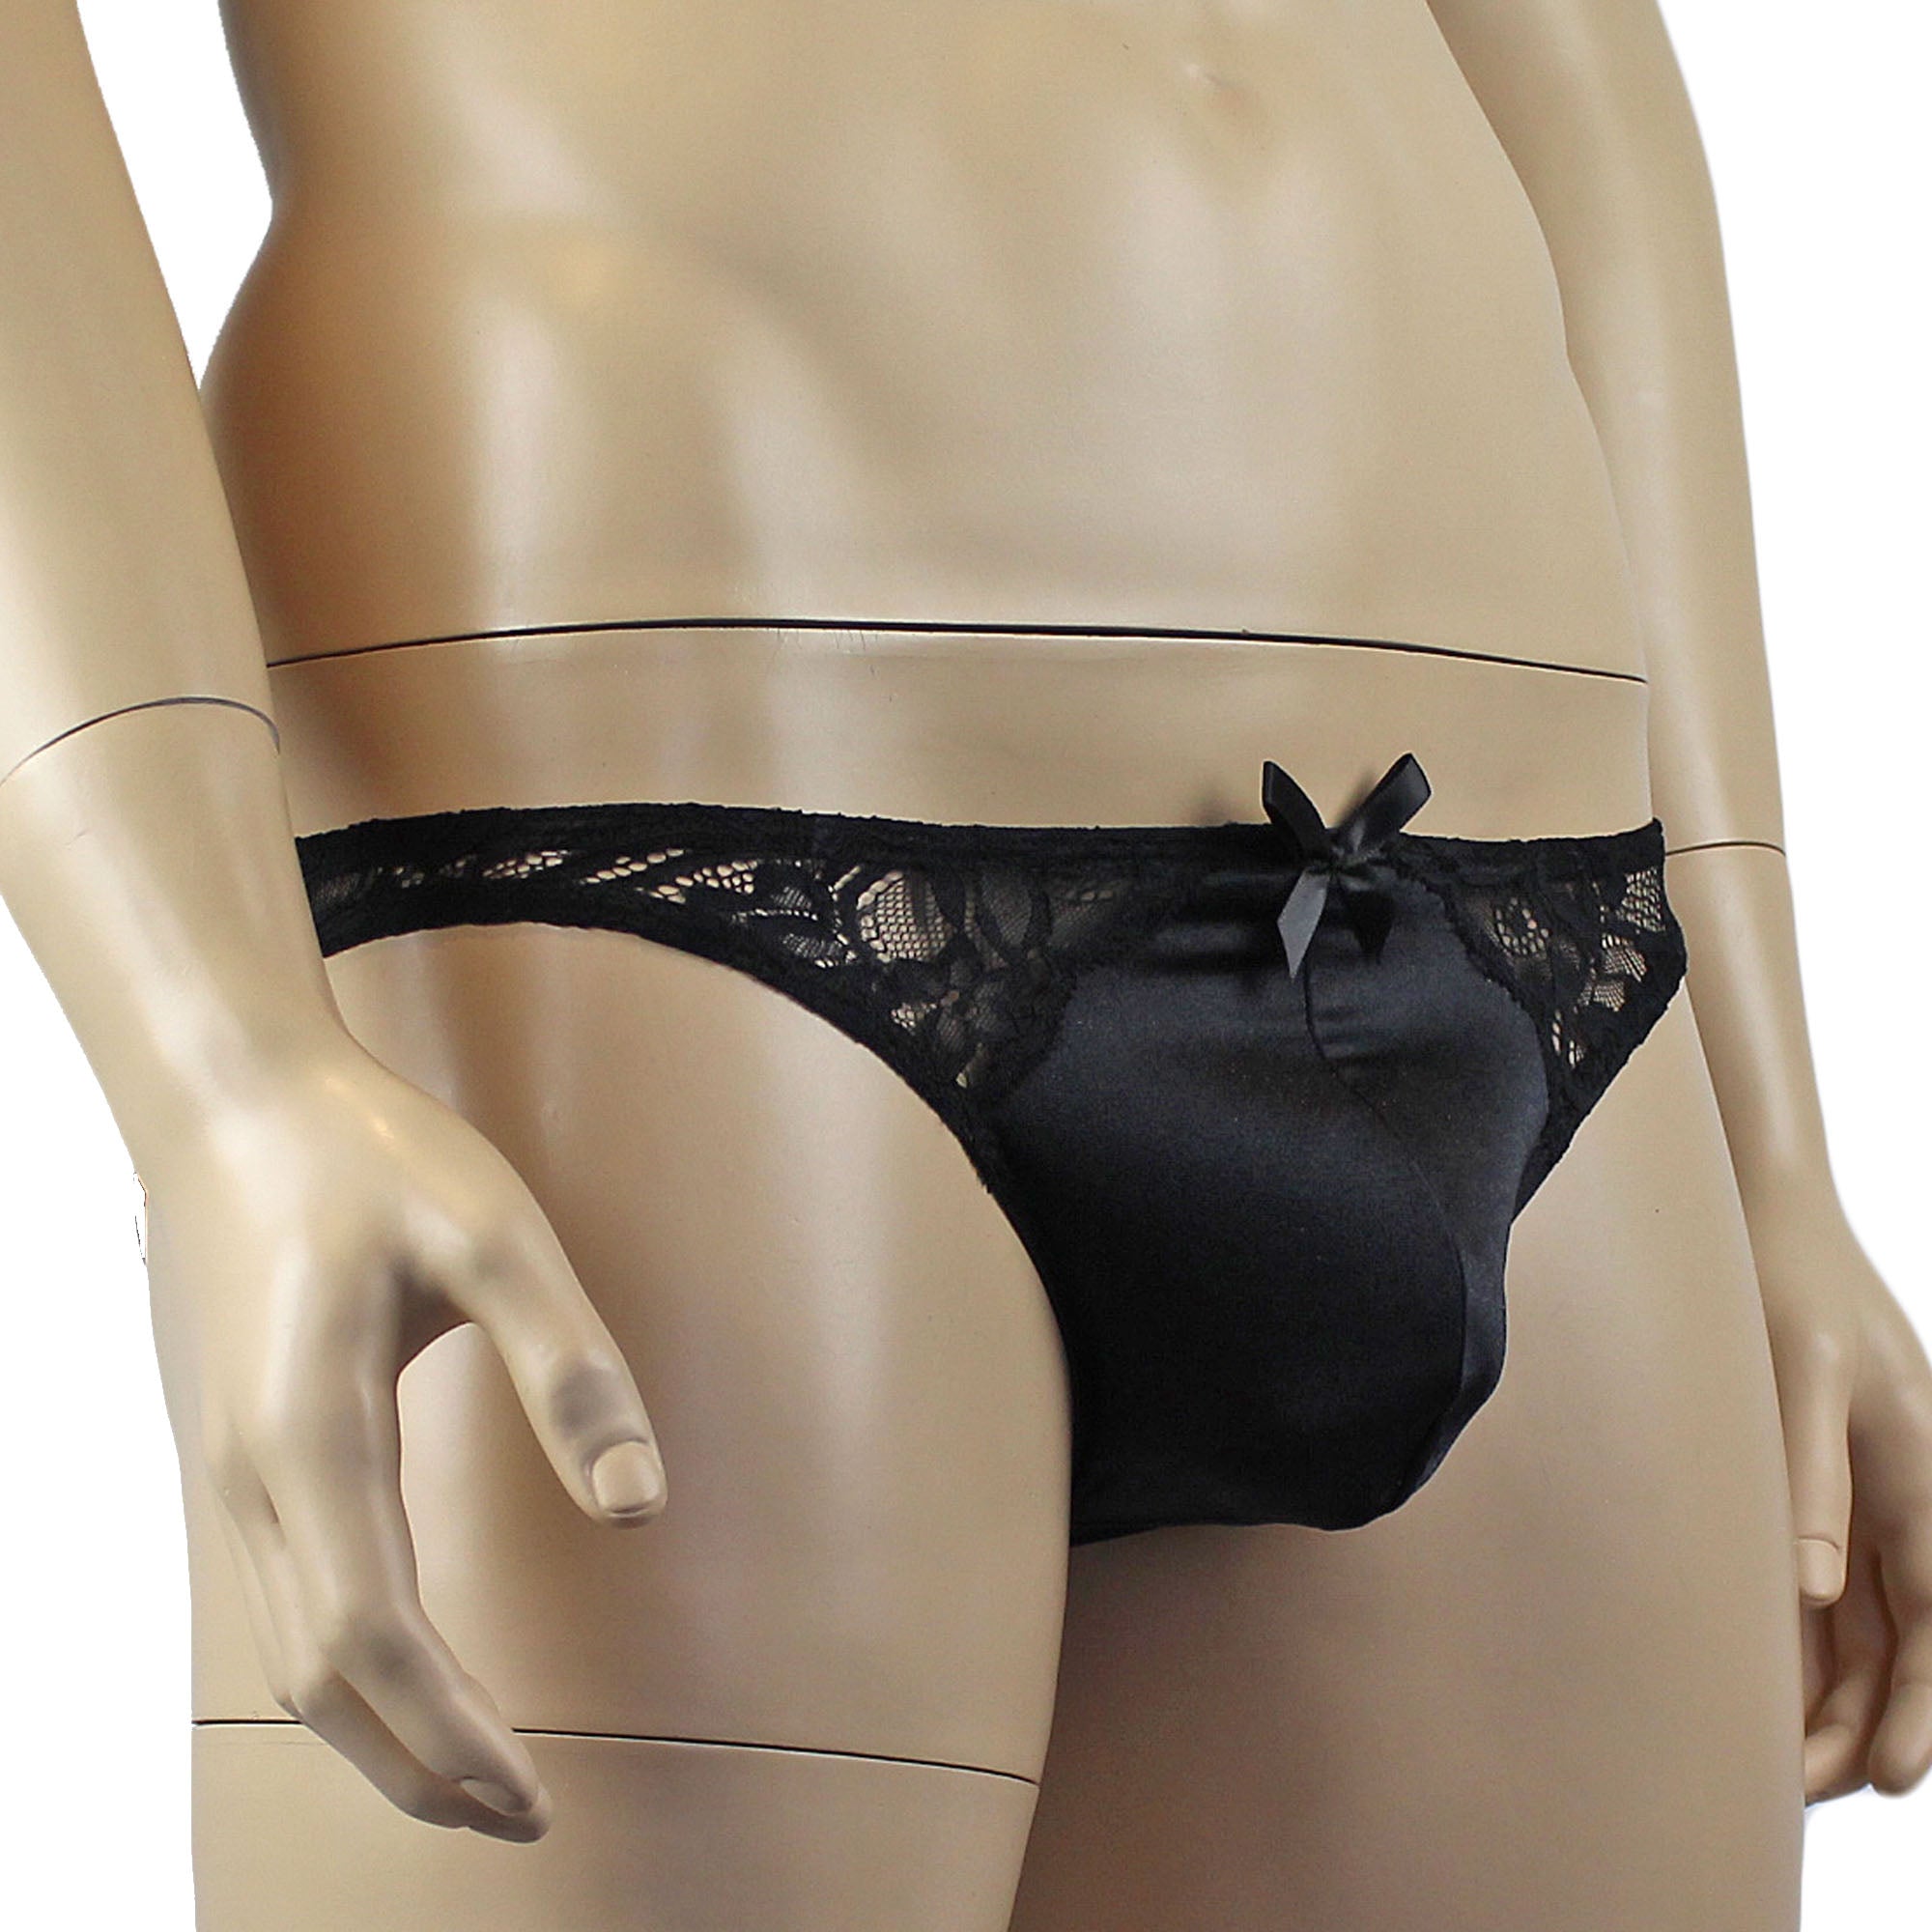 Mens Risque G string Thong Black and Black Lace